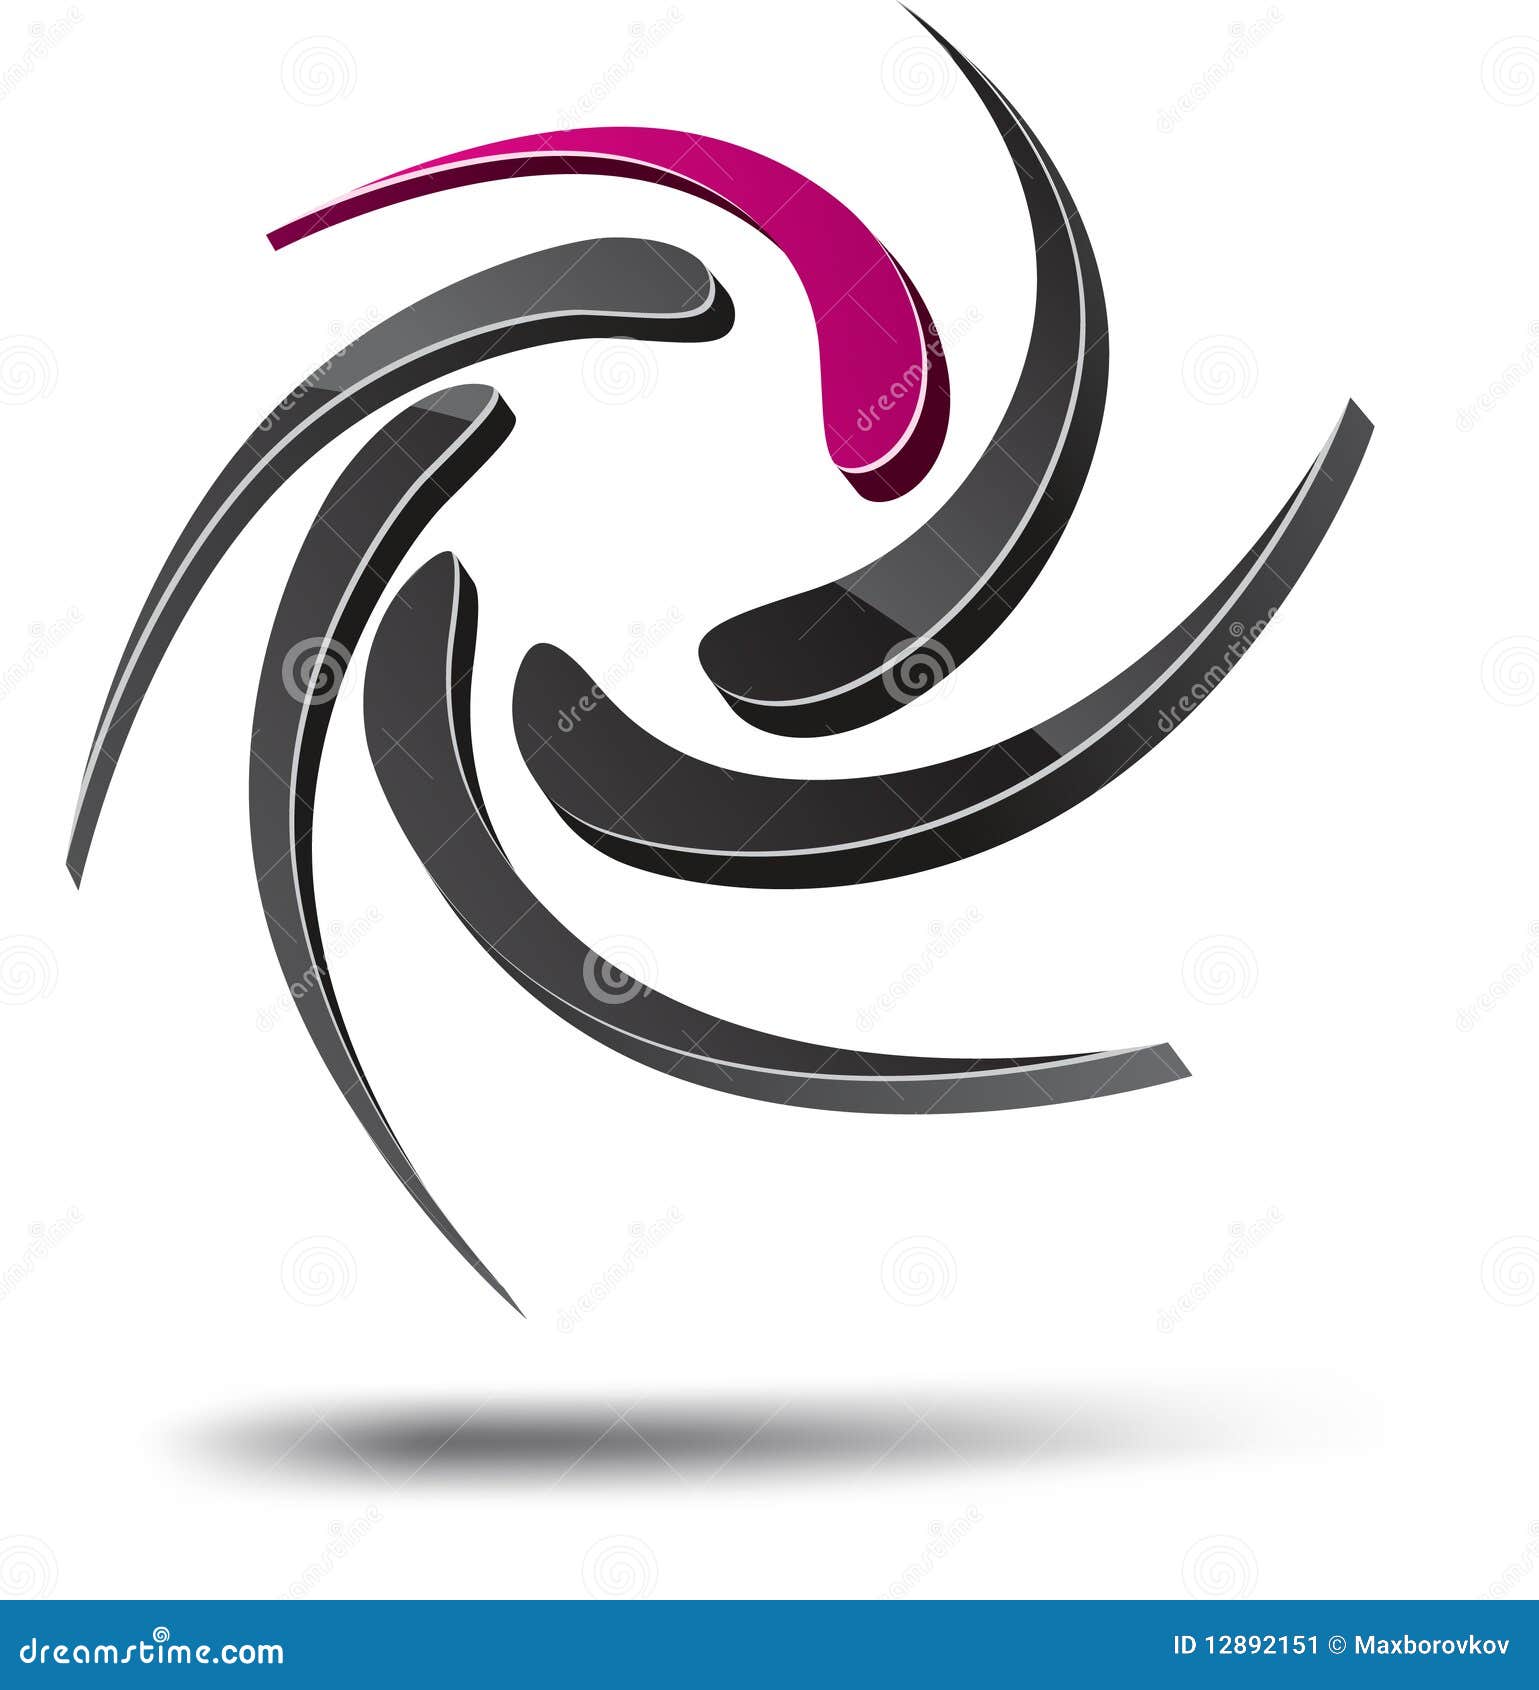 Abstract Symbol. Stock Image - Image: 12892151